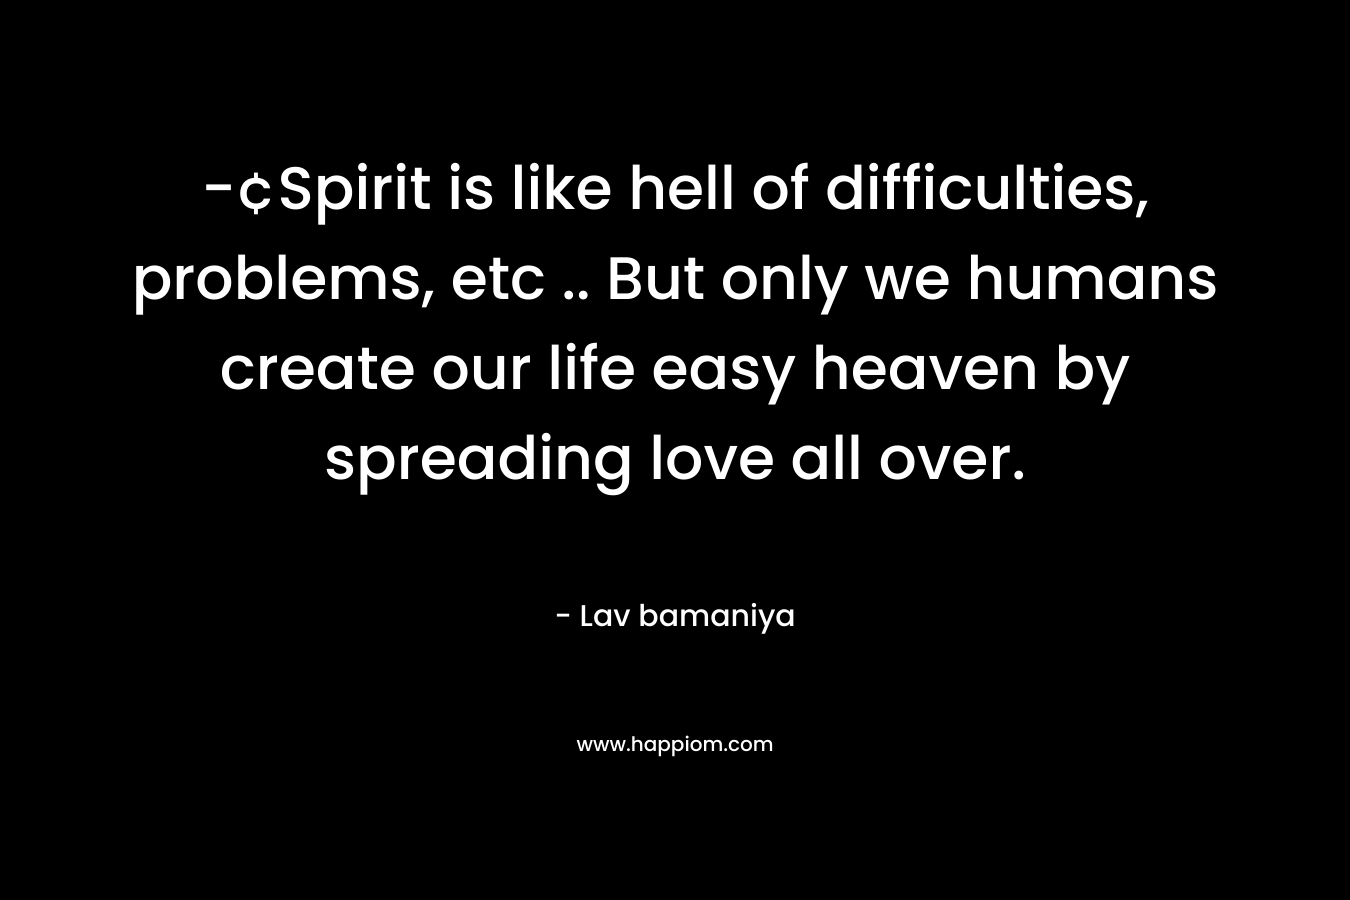 -¢Spirit is like hell of difficulties, problems, etc .. But only we humans create our life easy heaven by spreading love all over.